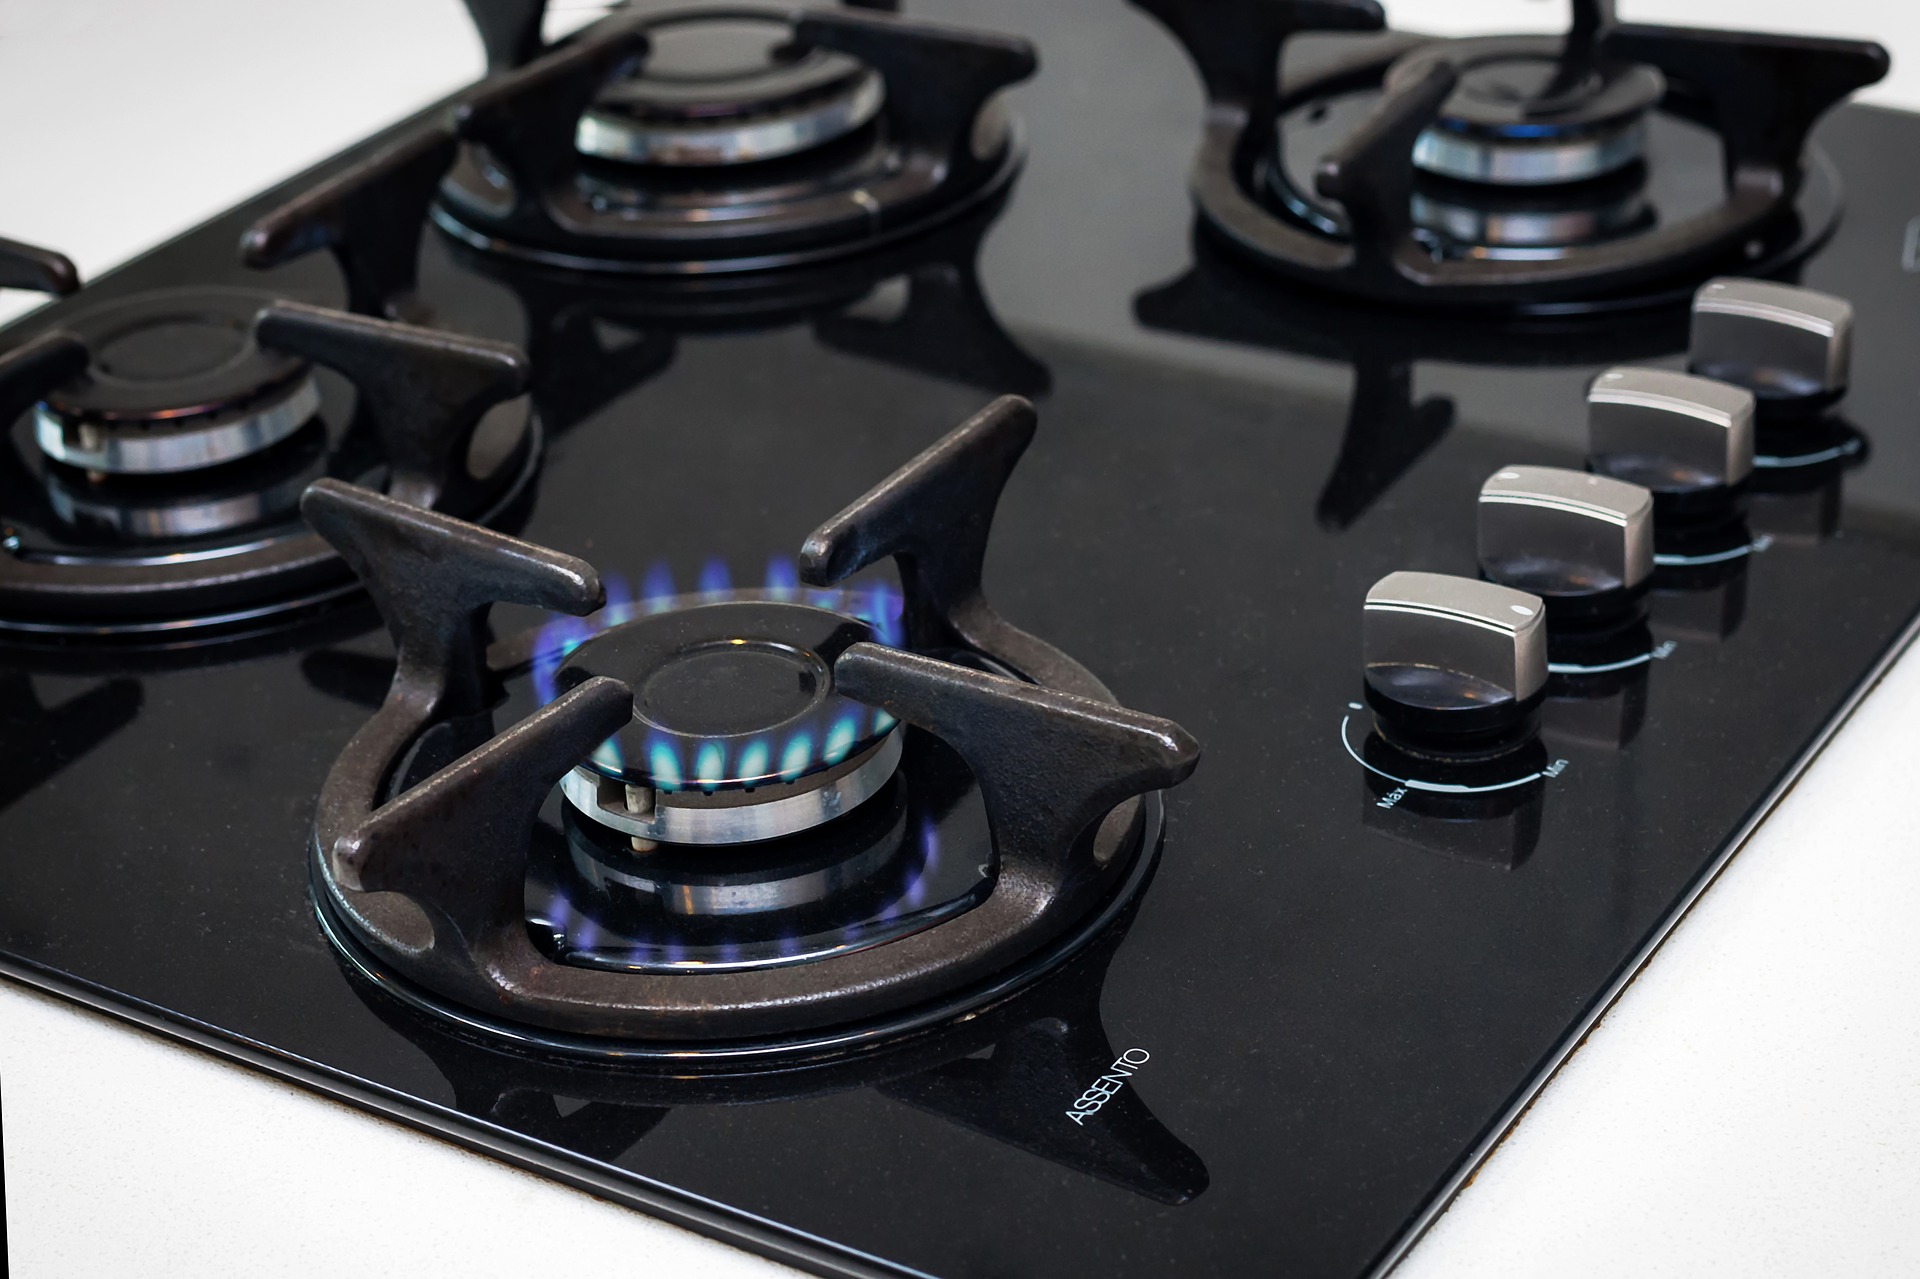 Image of a gas stove with a burner on.